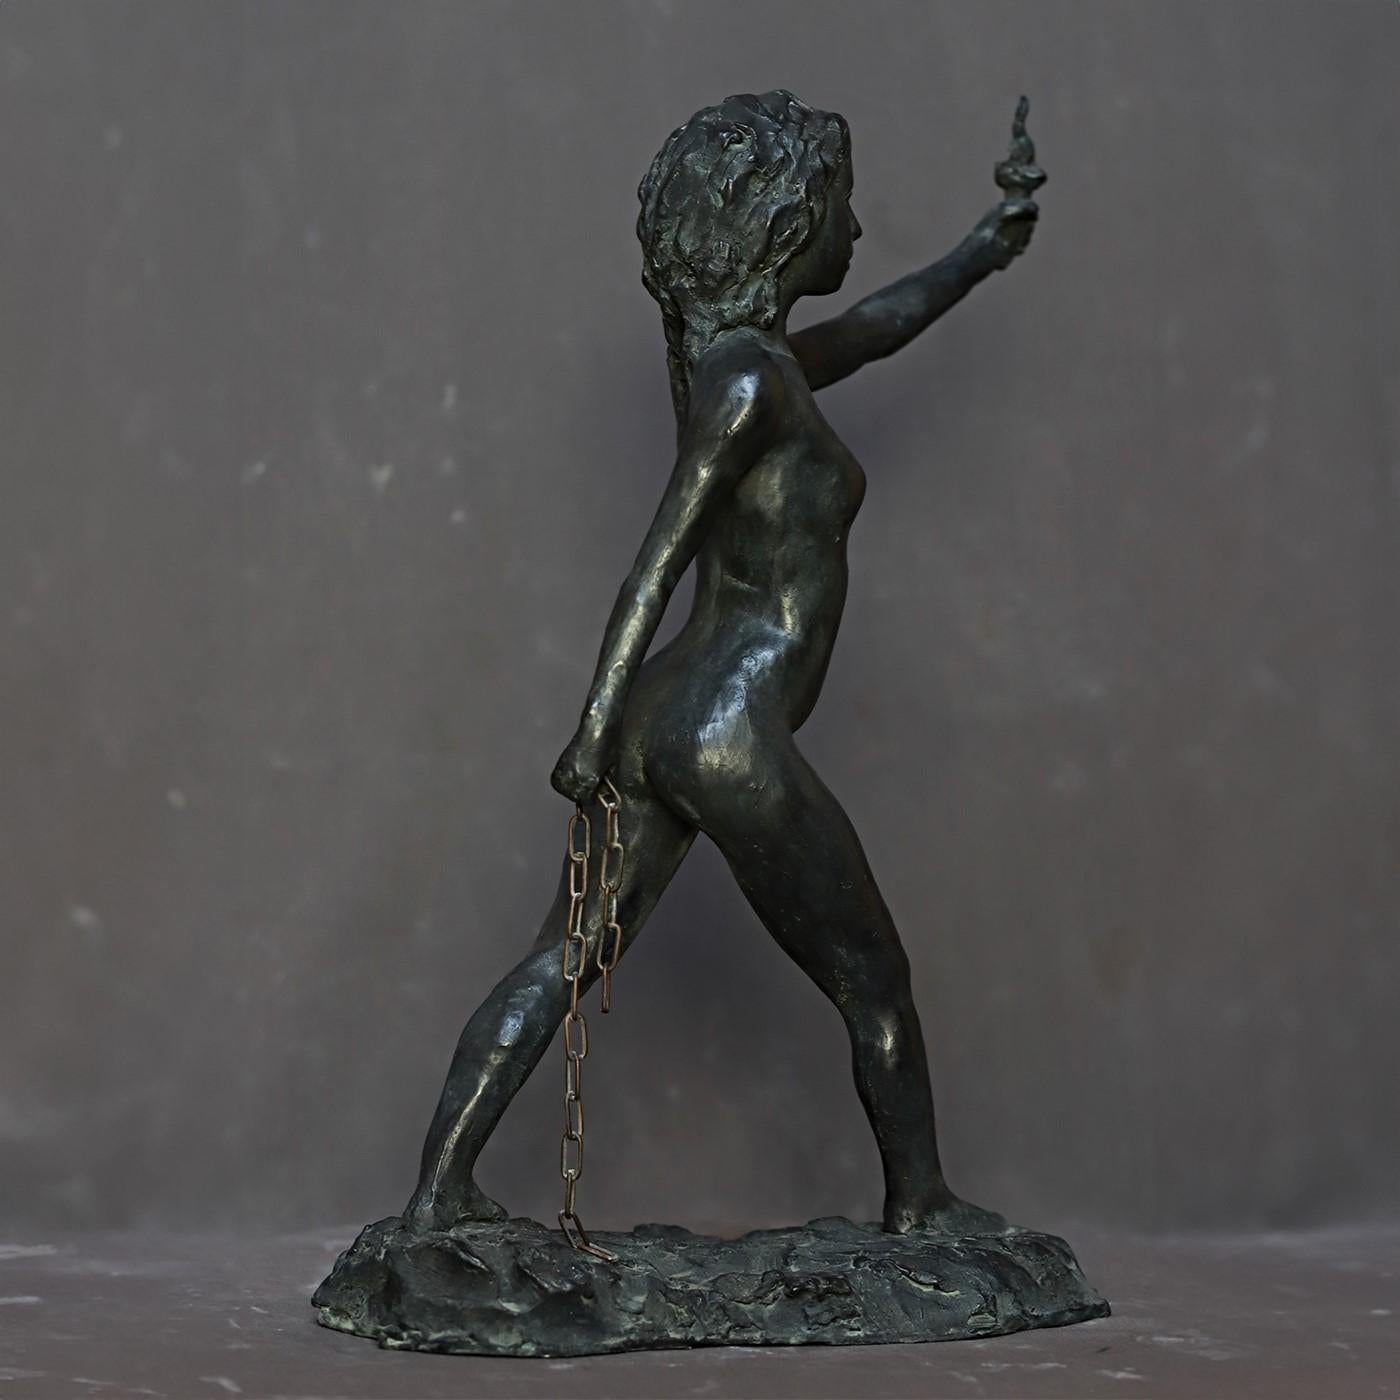 This marvelous bronze sculpture depicting a woman fiercely raising a torch - a symbol of freedom - in one hand and holding a broken chain - symbolizing the end of slavery - in the other is an original piece conceived as an ode to freedom. The